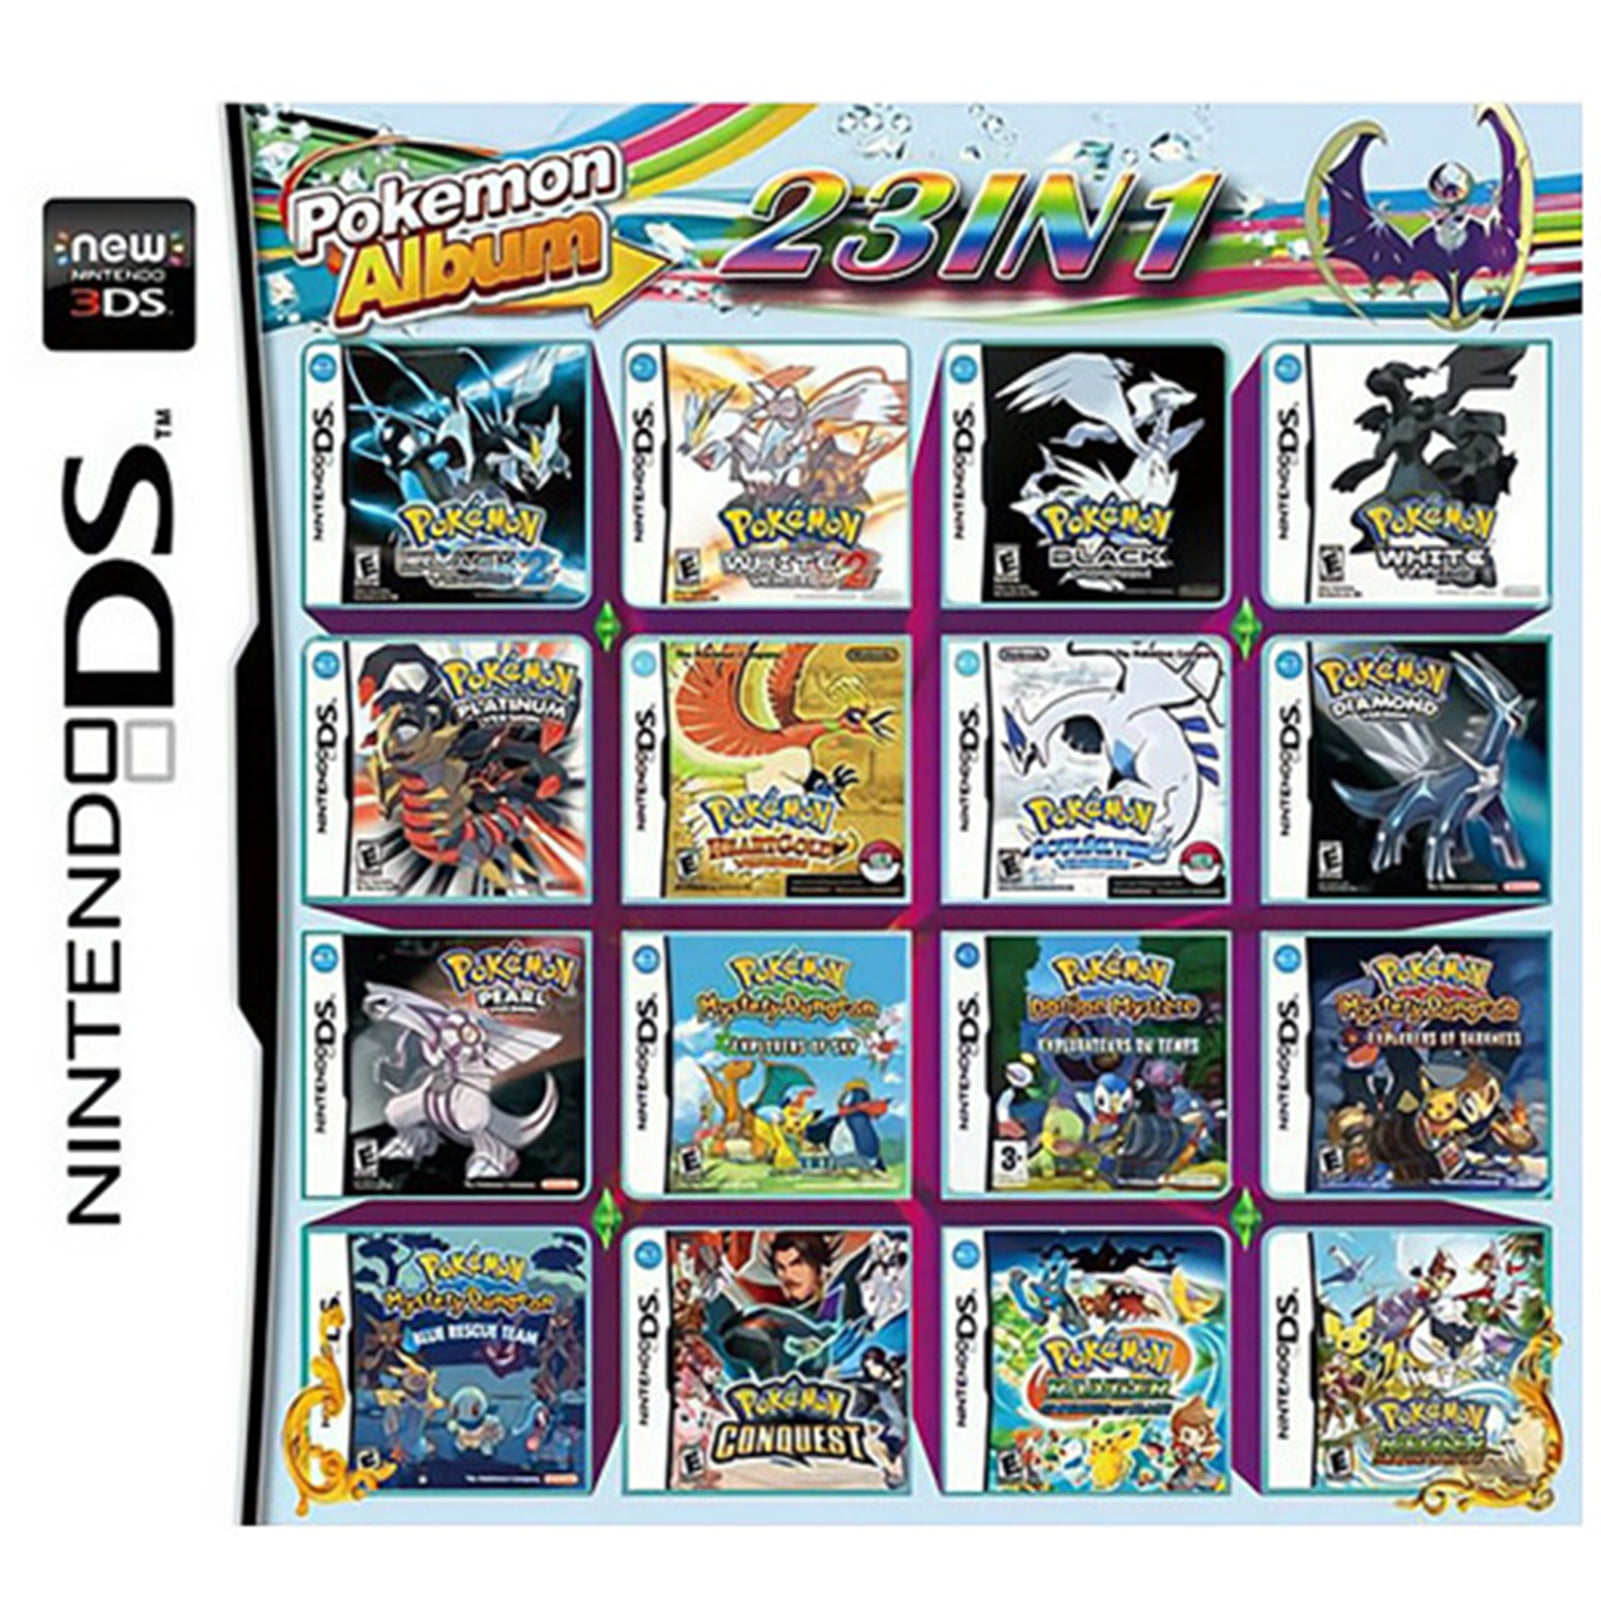 Noveno documental Exquisito Super Combo Multicart for Nintendo DS, 23 IN 1 Game Cartridge, DS Video  Game Pack Card - Walmart.com